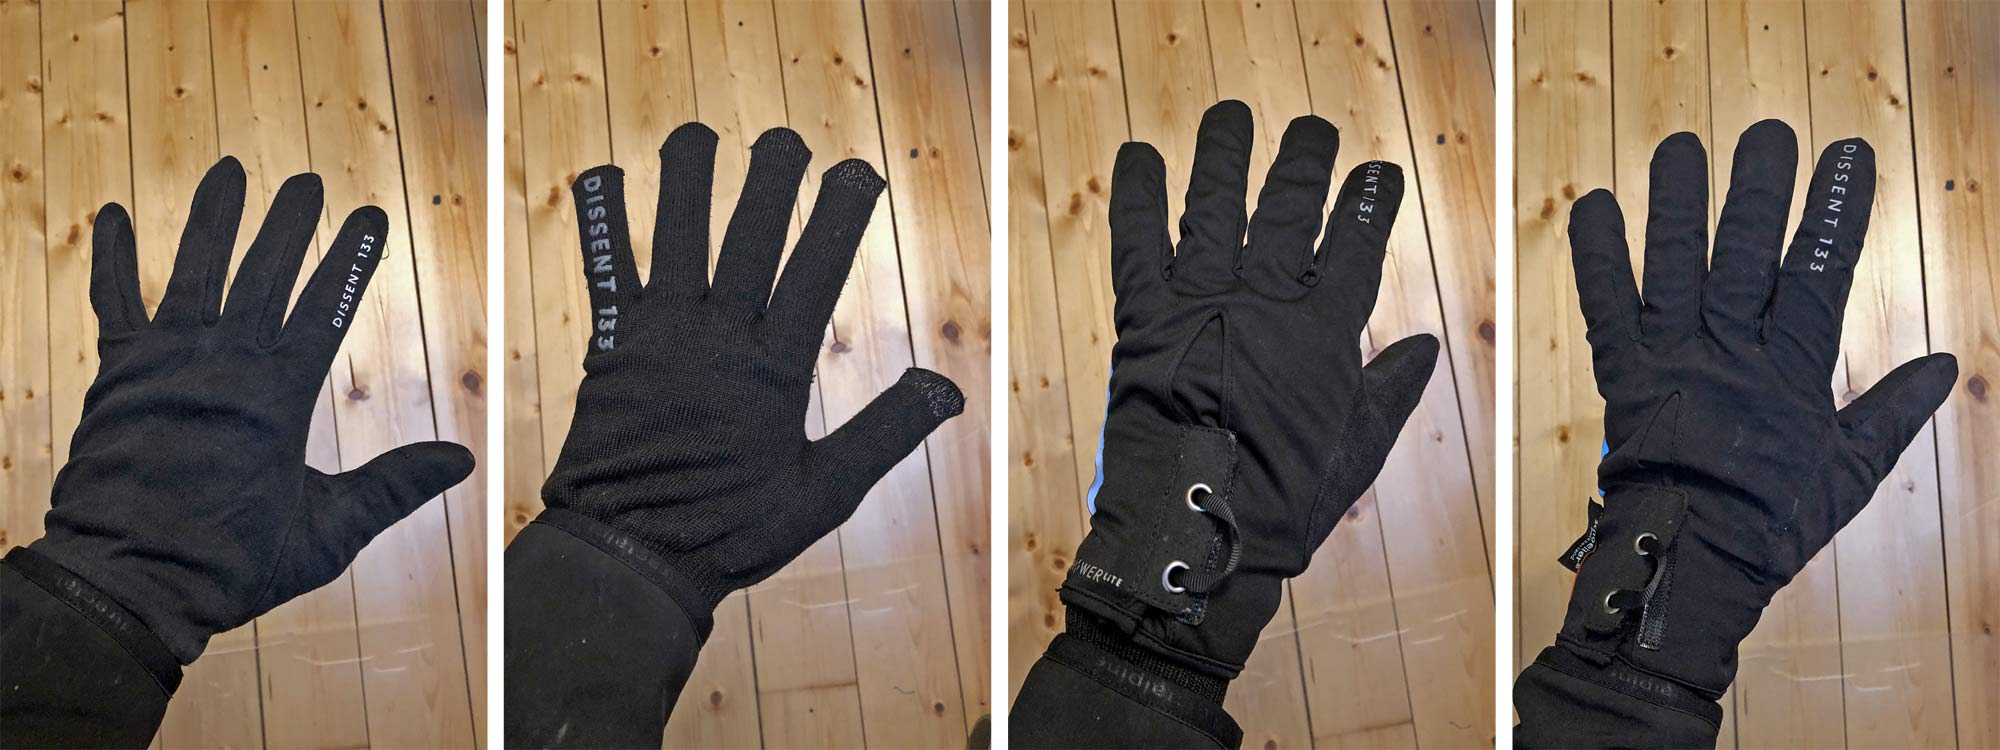 Dissent 133 Ultimate Glove Cycling Pack for cold and/or wet winter riding